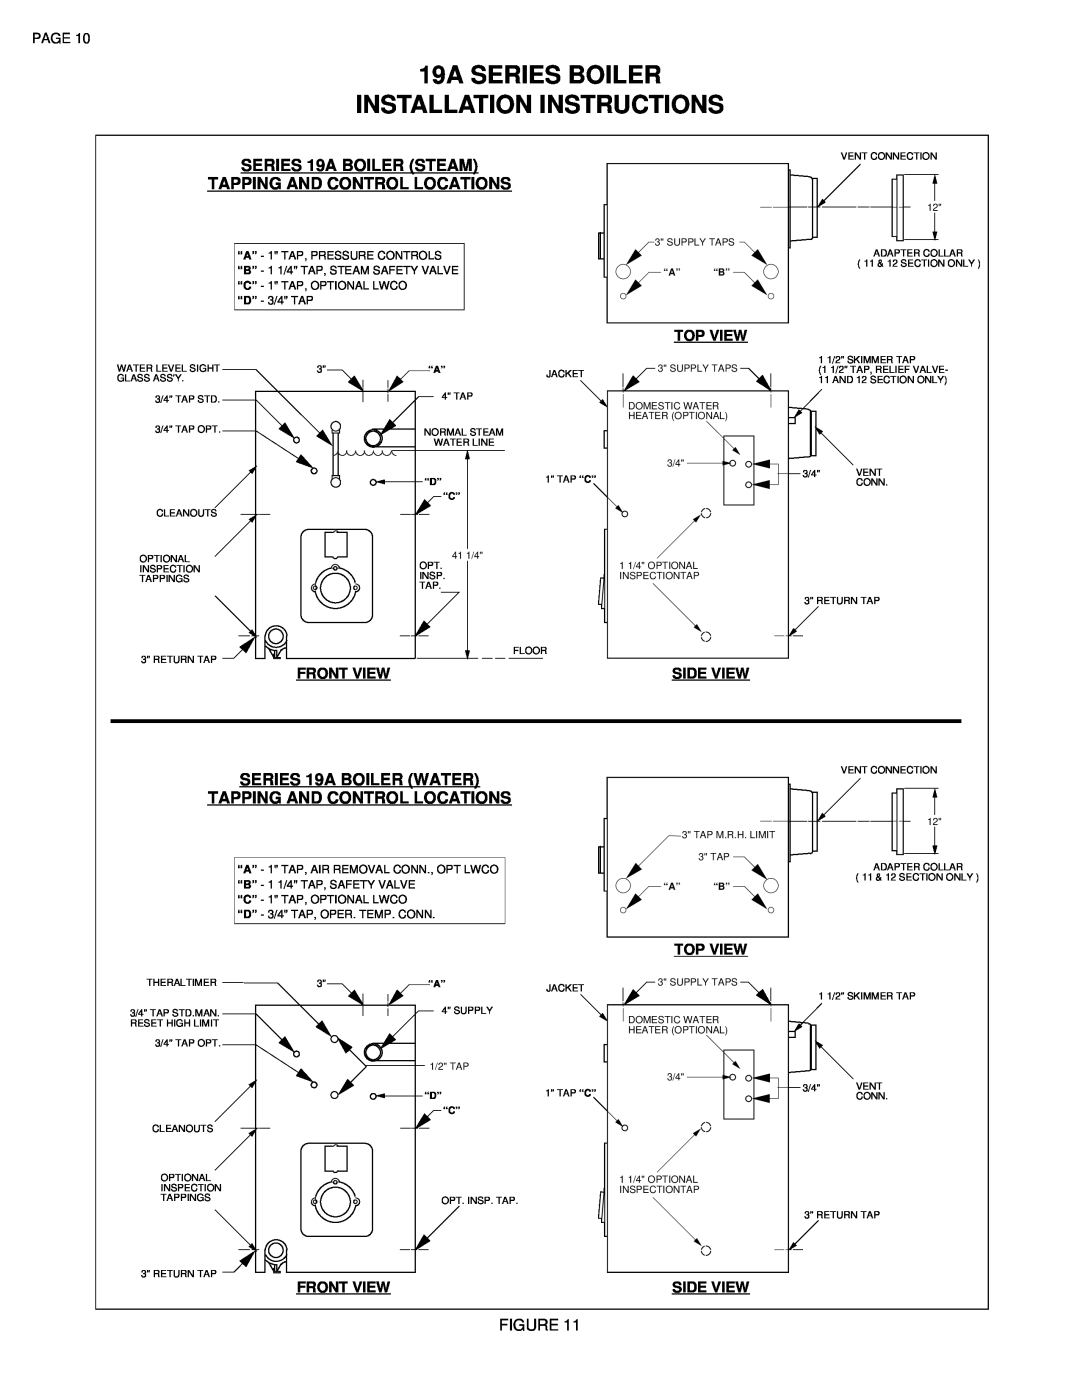 Smith Cast Iron Boilers 19A SERIES BOILER INSTALLATION INSTRUCTIONS, Top View, Front View, Side View 